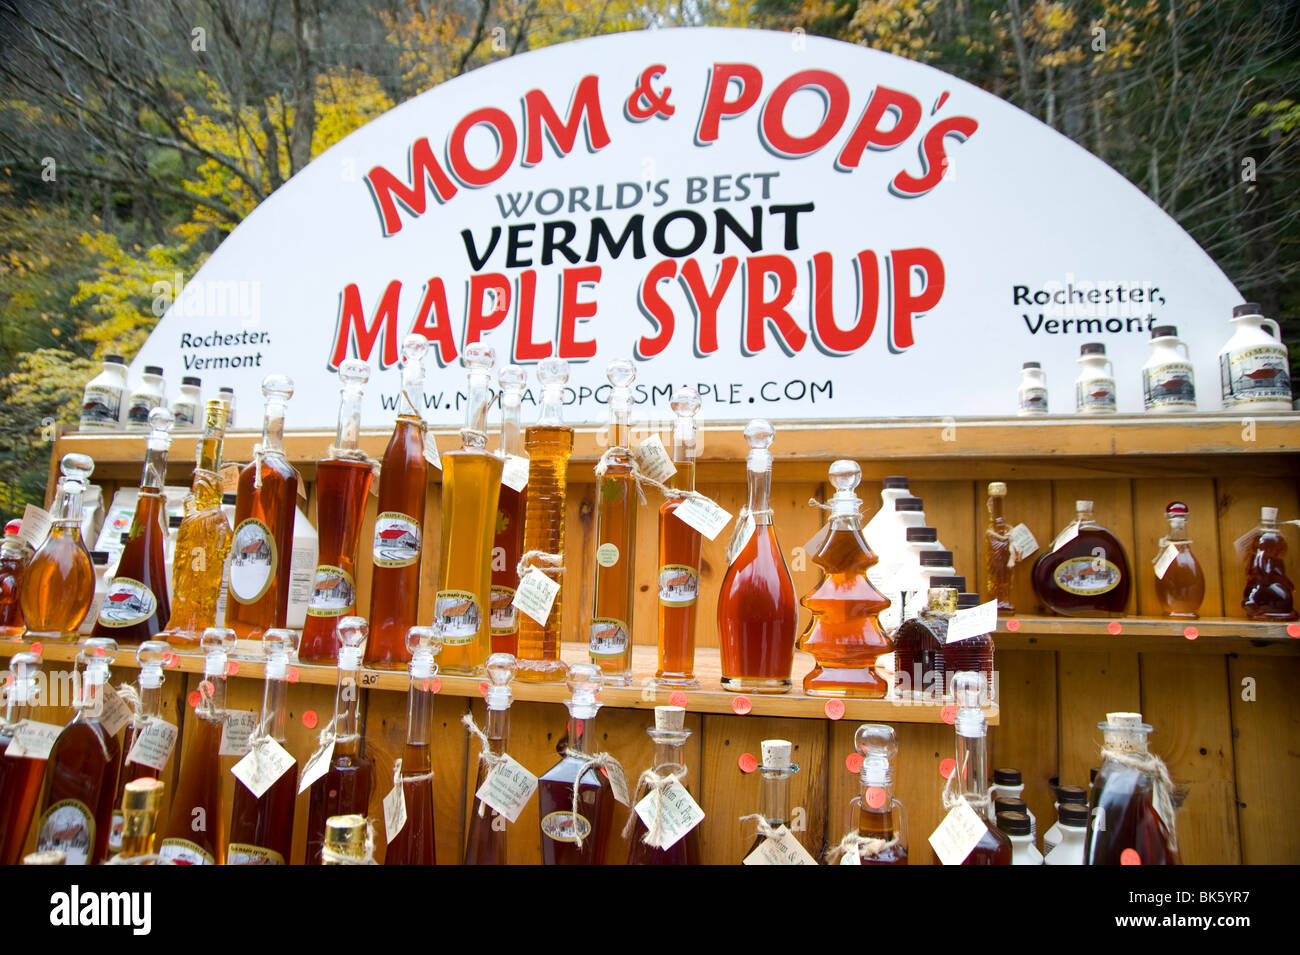 Bottles of maple syrup for sale at a roadside stand at Moss Glen Falls in Granville, Vermont, USA Stock Photo